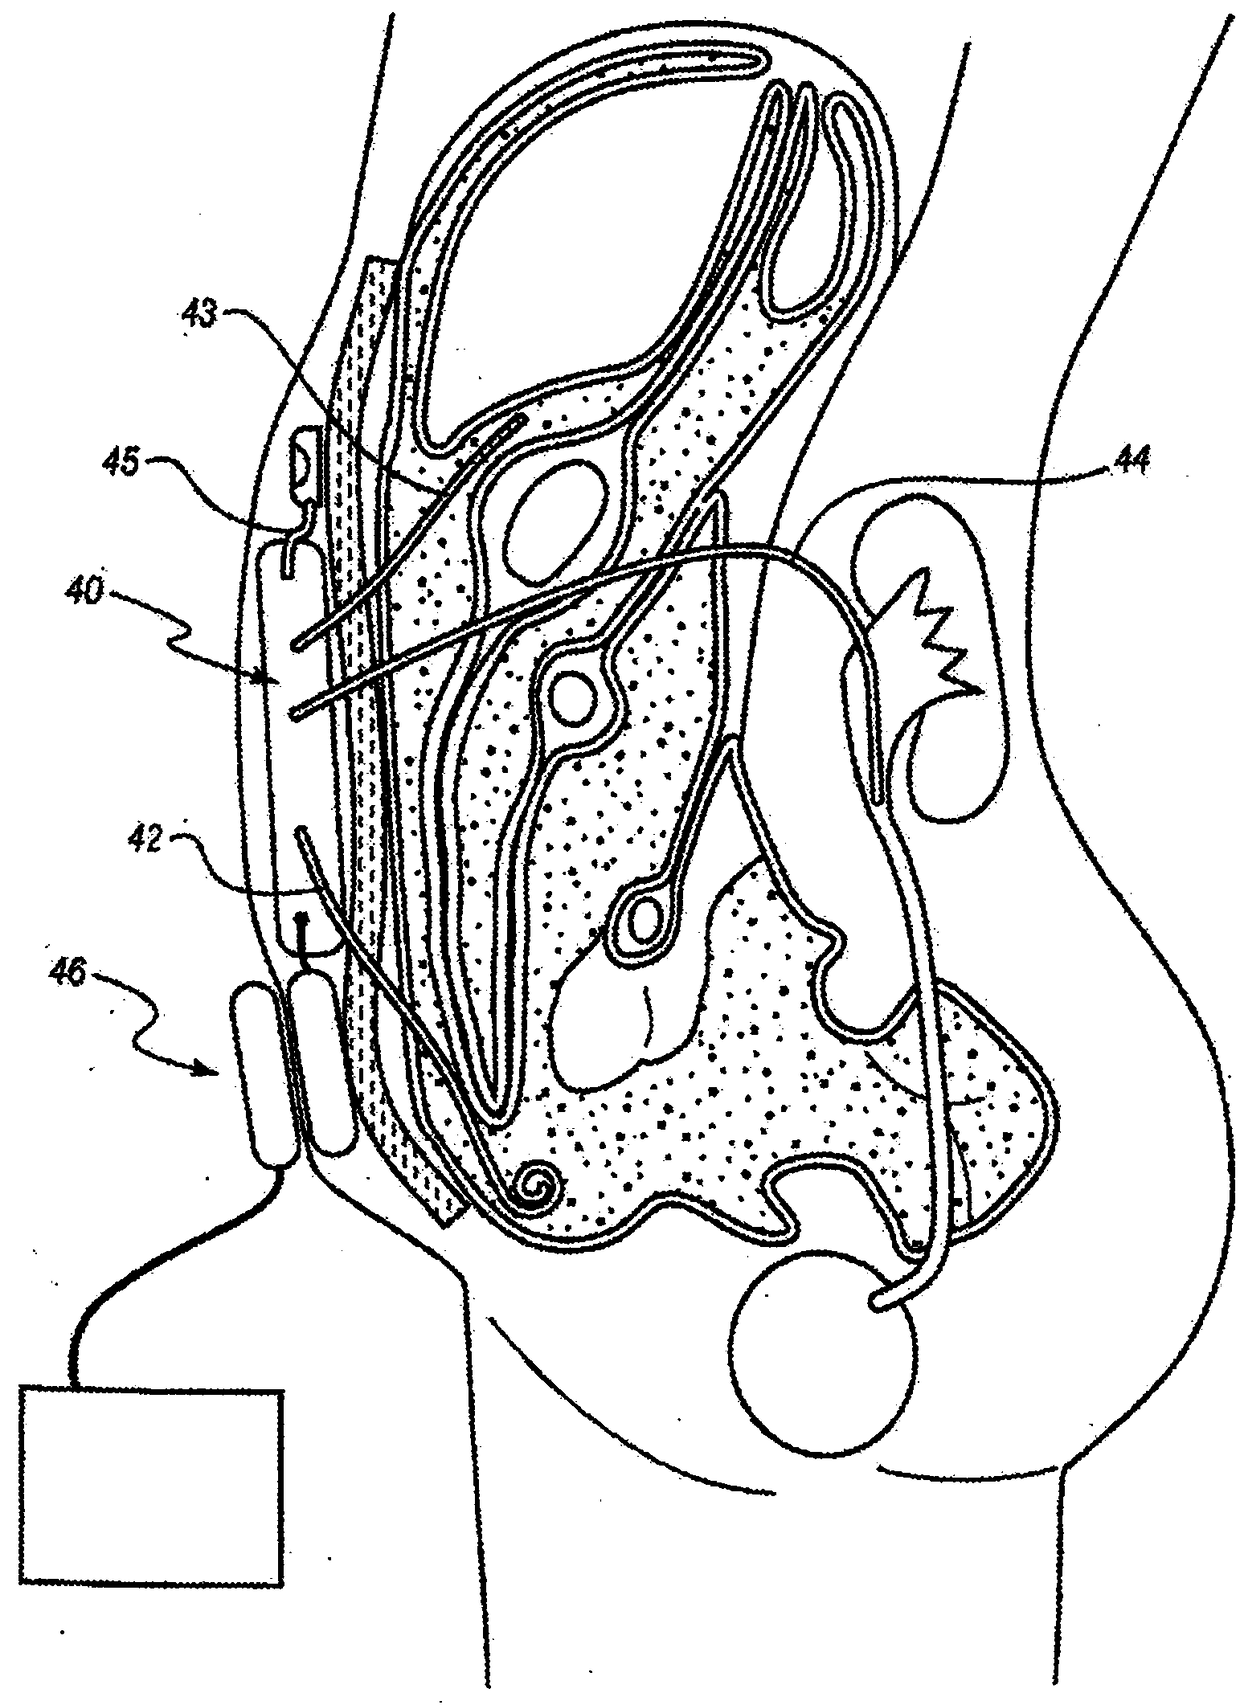 Peritoneal dialysis systems and methods